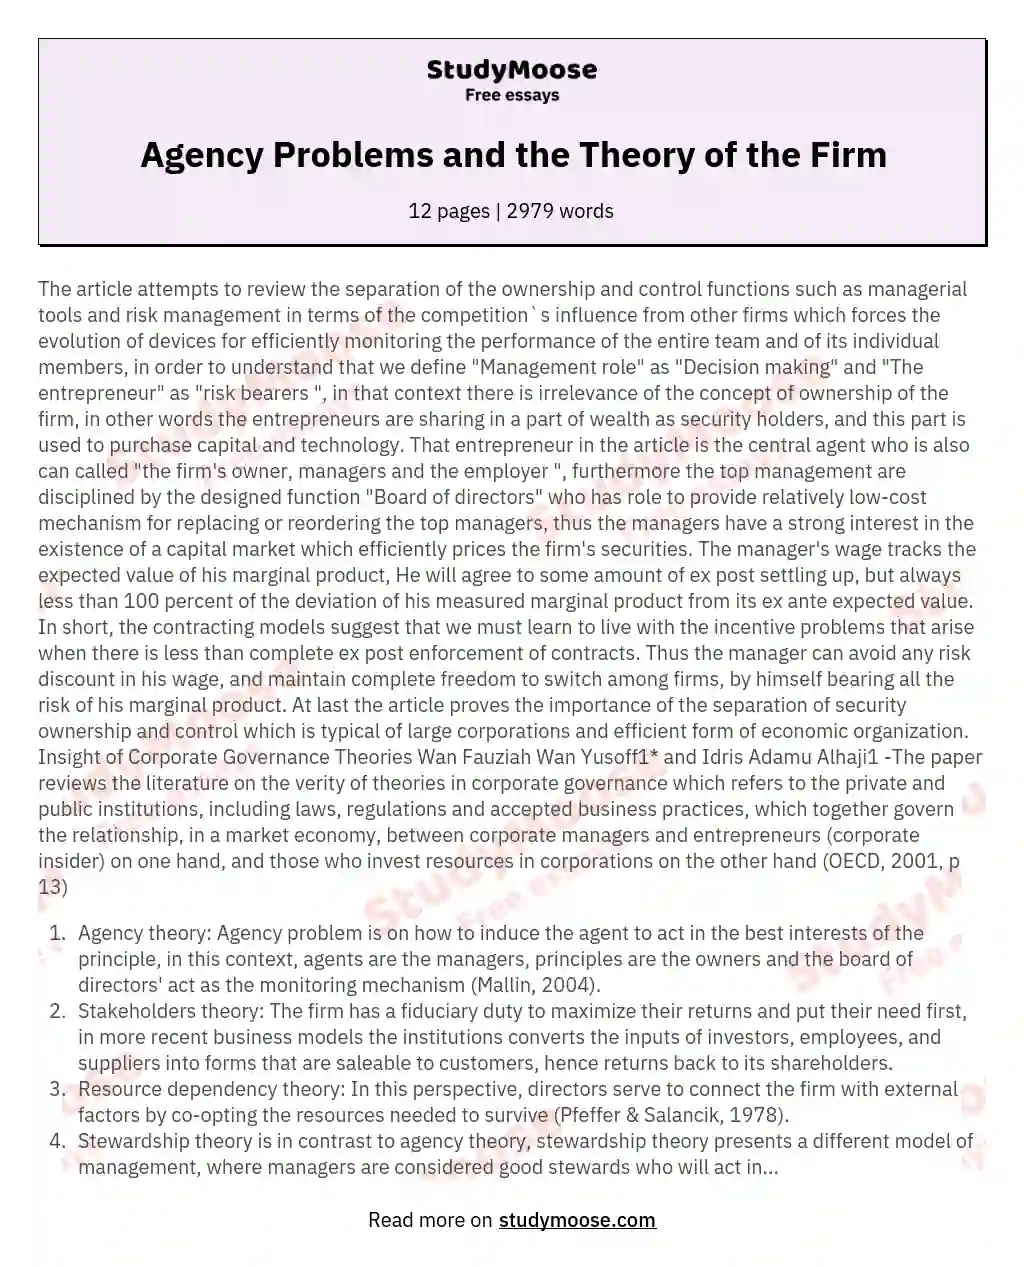 Agency Problems and the Theory of the Firm essay